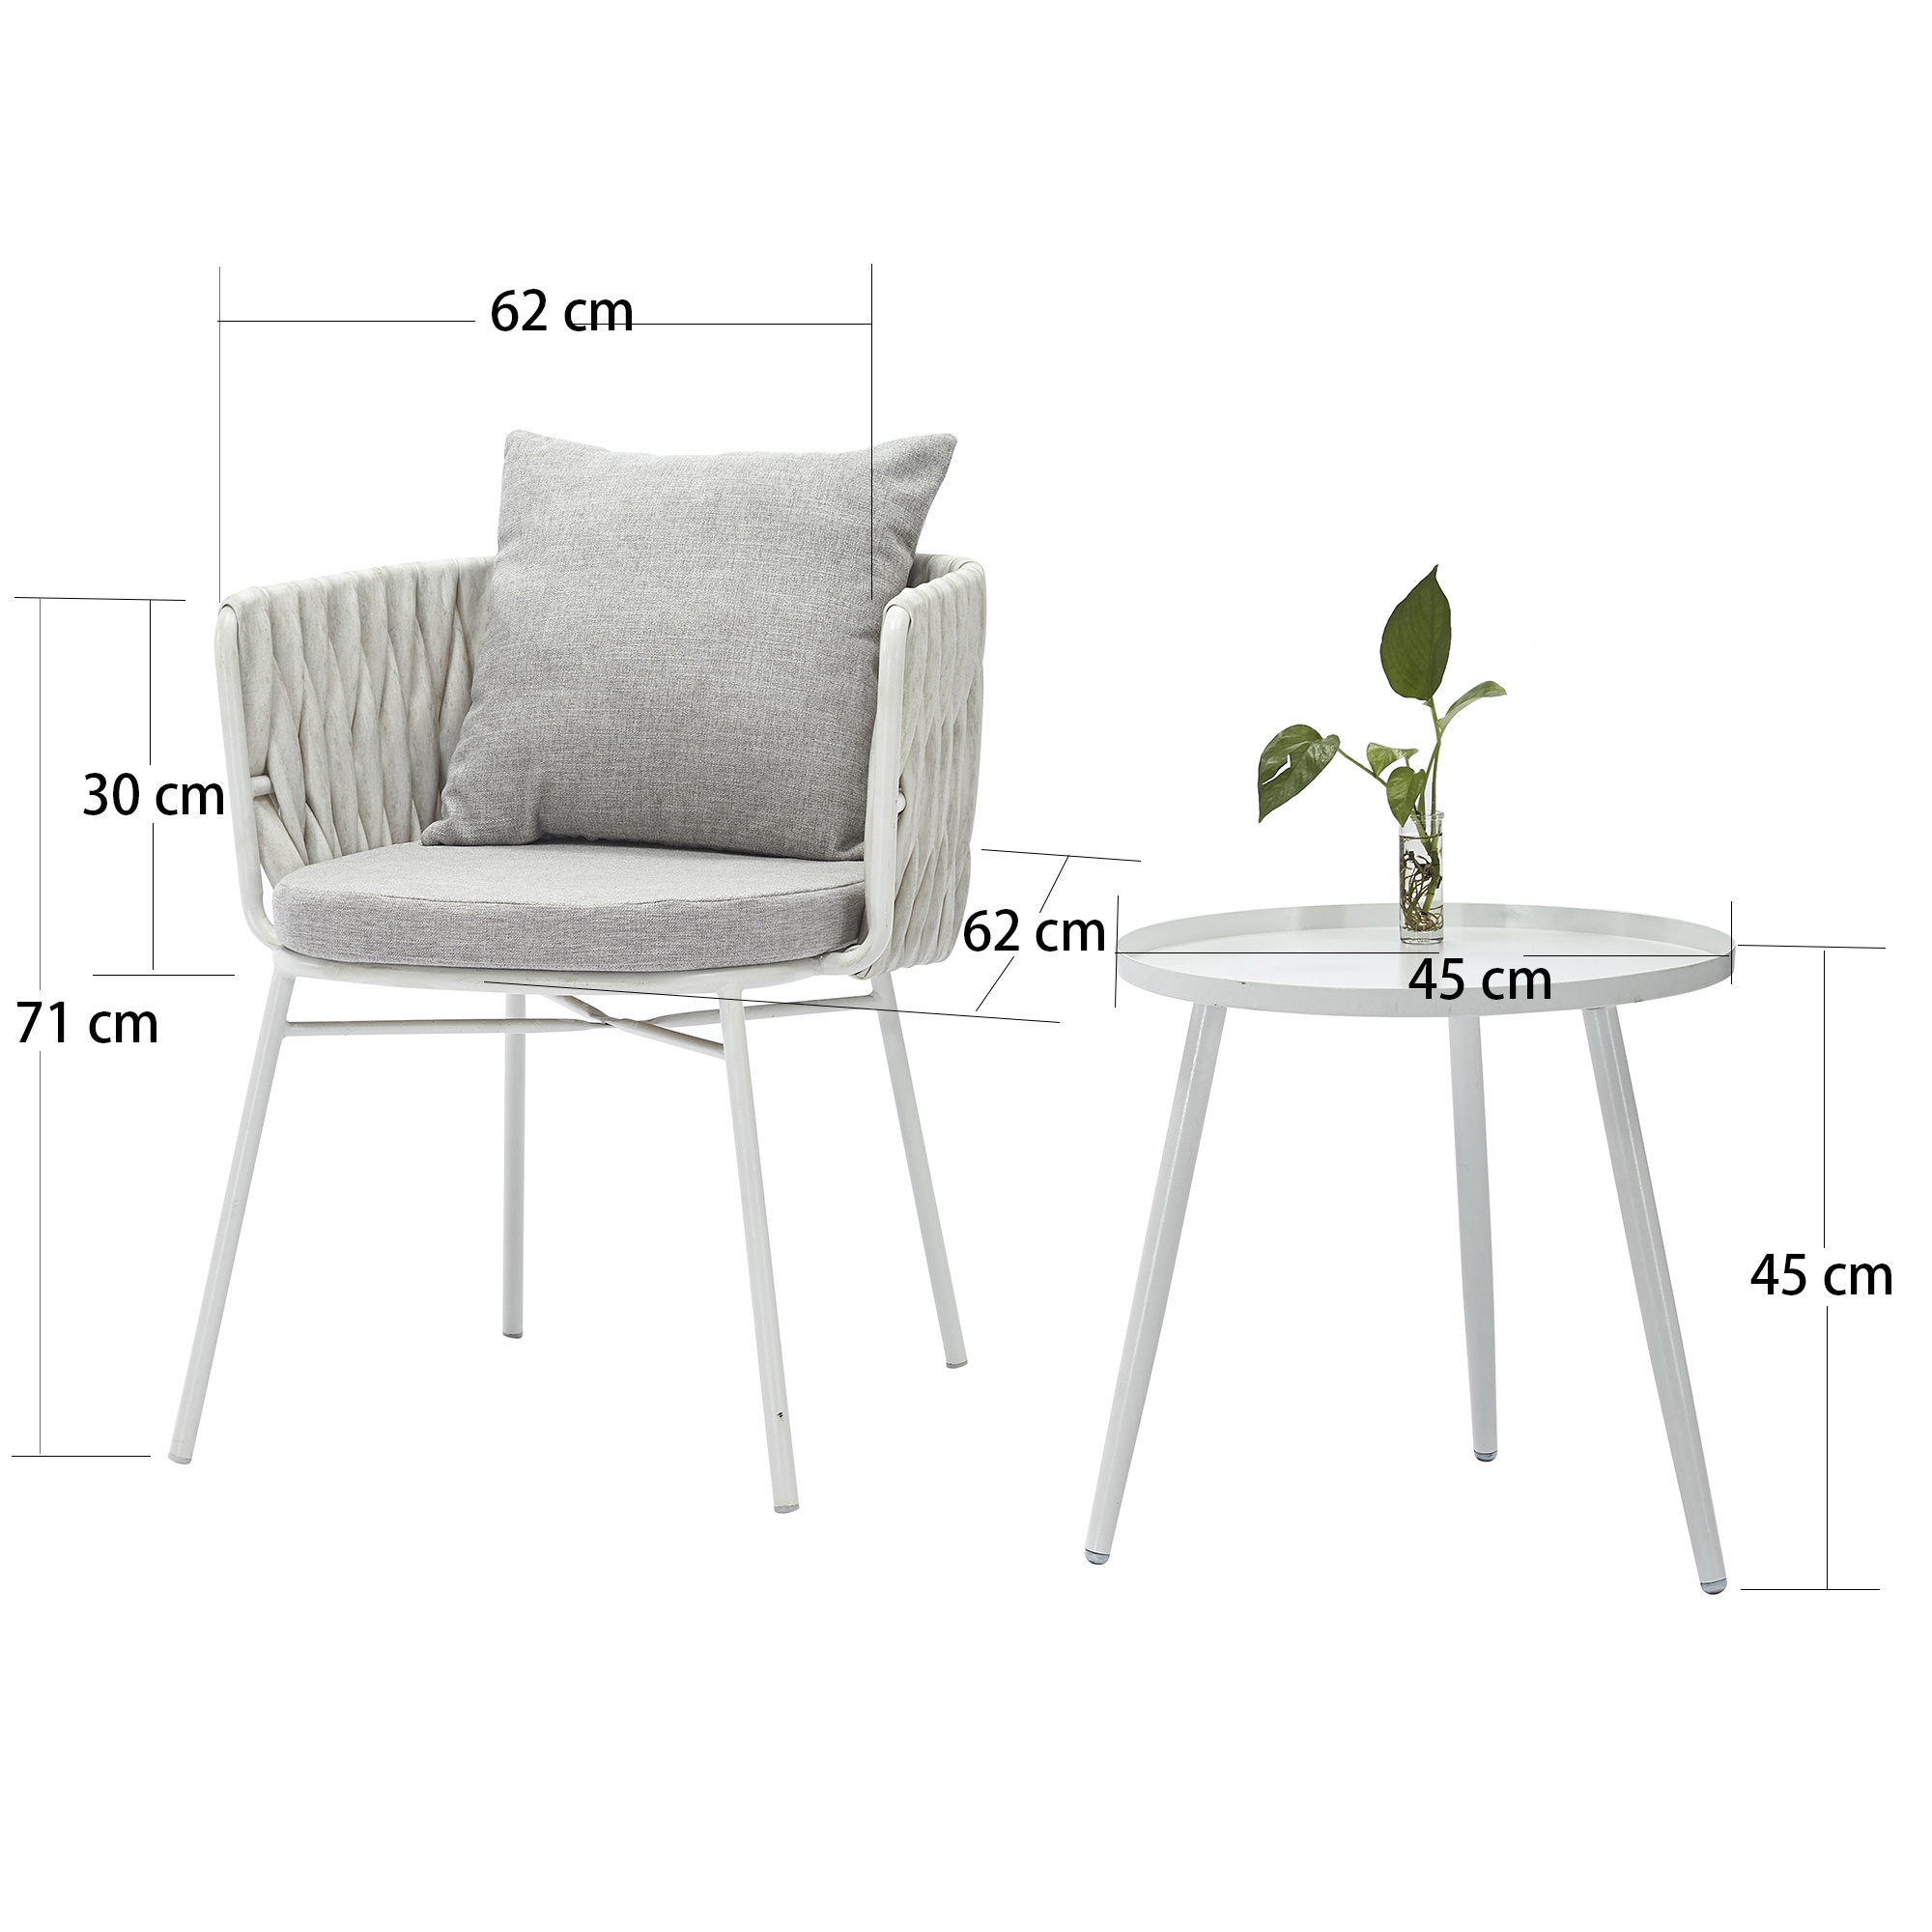 3-Pieces Patio Conversation Bistro Set, Aukfa High Quality Coffee Table Set, Indoor Patio Balcony Outdoor White Gray Coffee Chair Set, Outdoor Garden Sets Rattan Chairs Patio Furniture, Light Gray - image 3 of 8